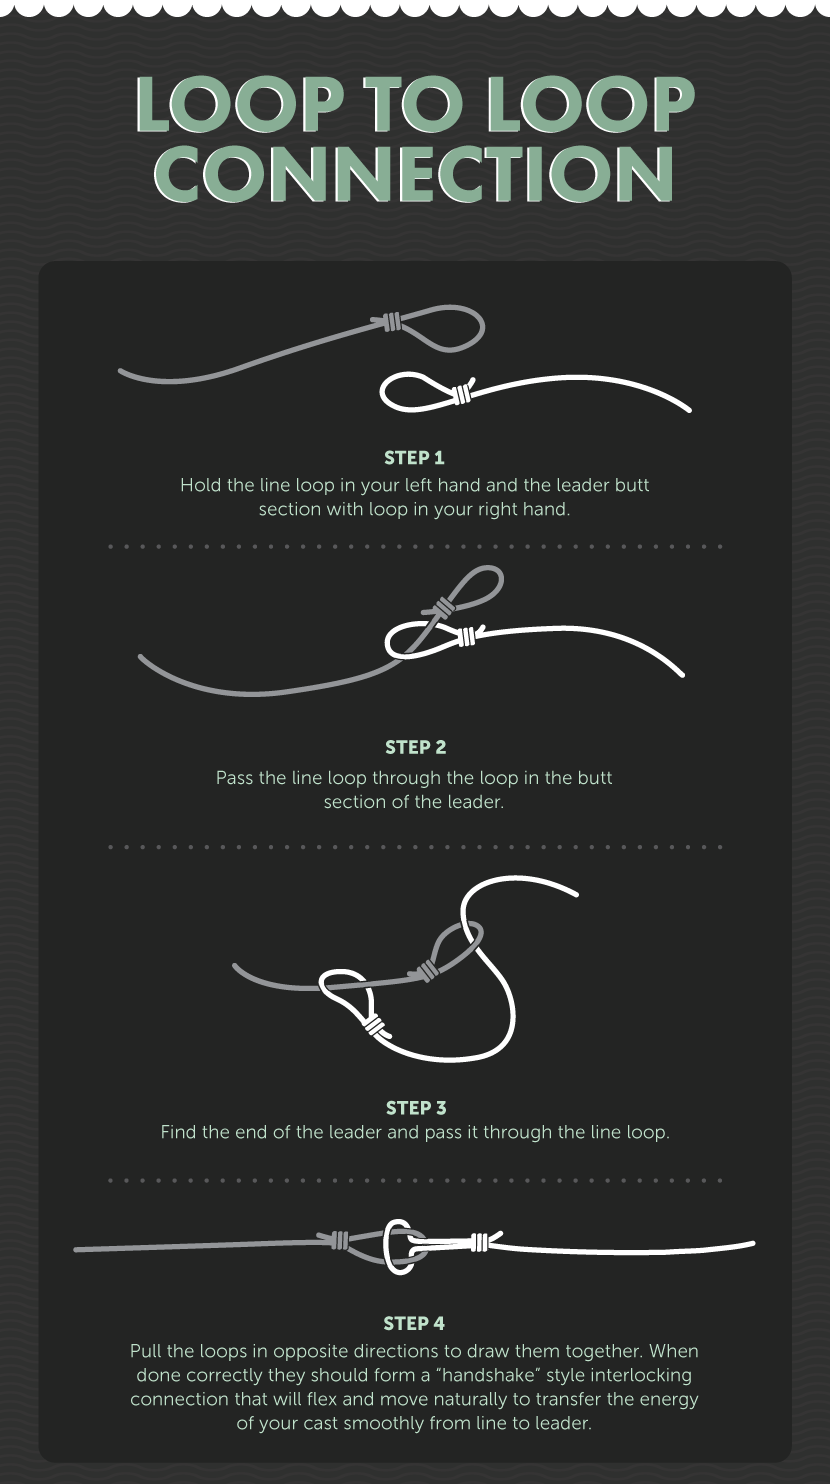 Loop-to-Loop Connection - Knots for Fly-Fishing